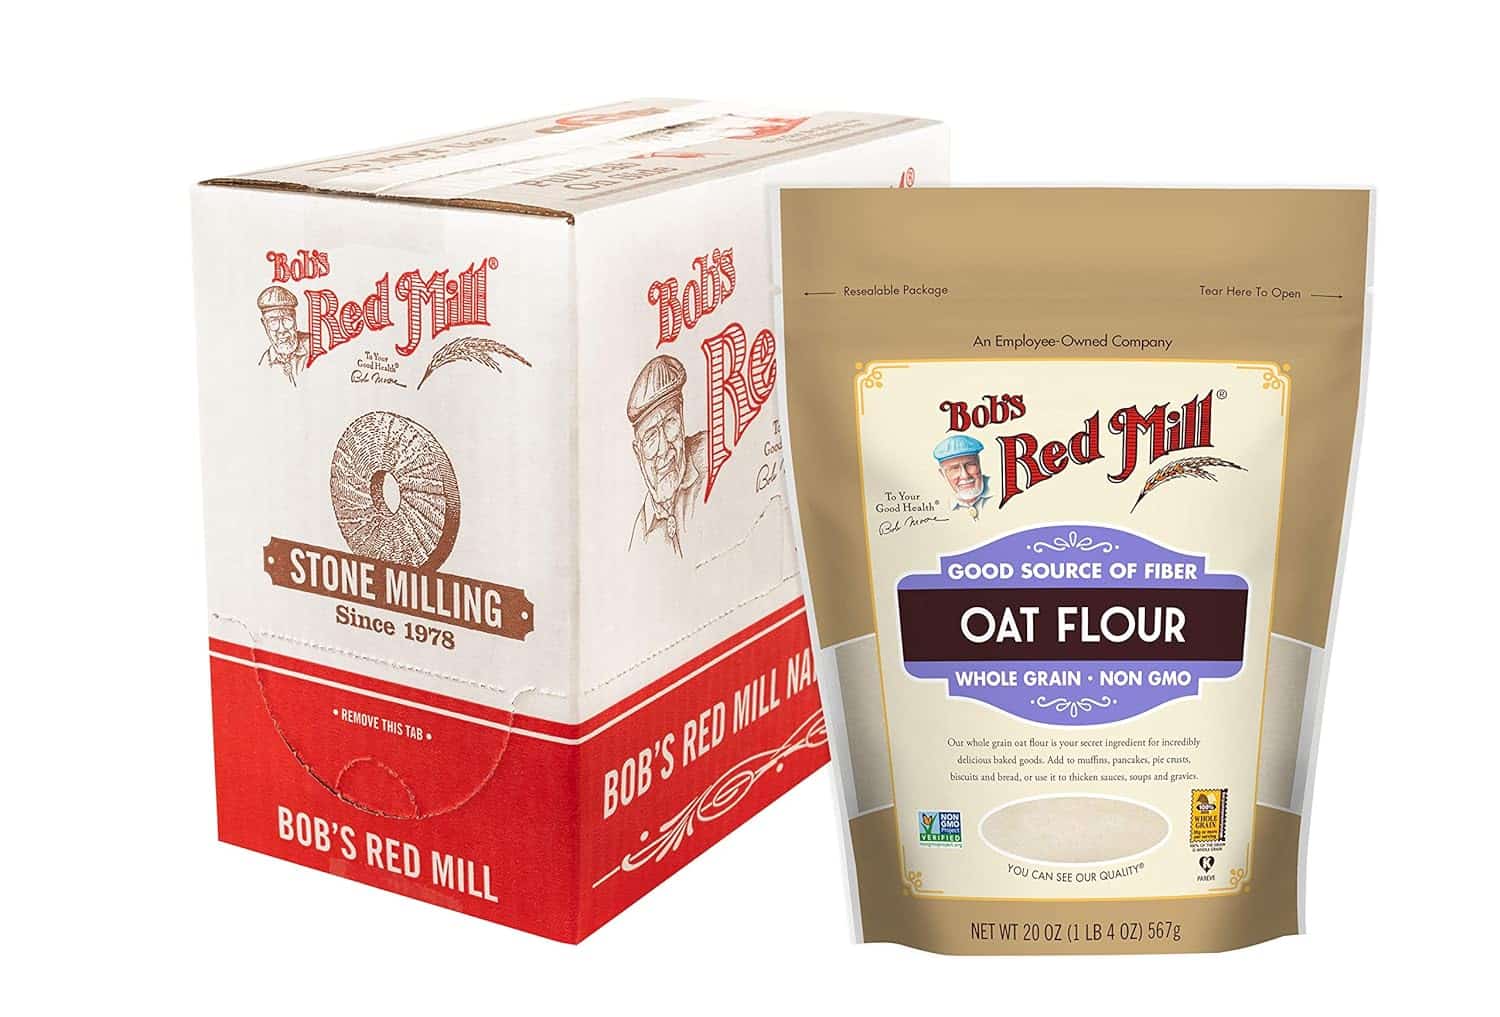 Bob’s Red Mill Whole Grain Oat Flour: A Nutritious and Versatile Baking Ingredient